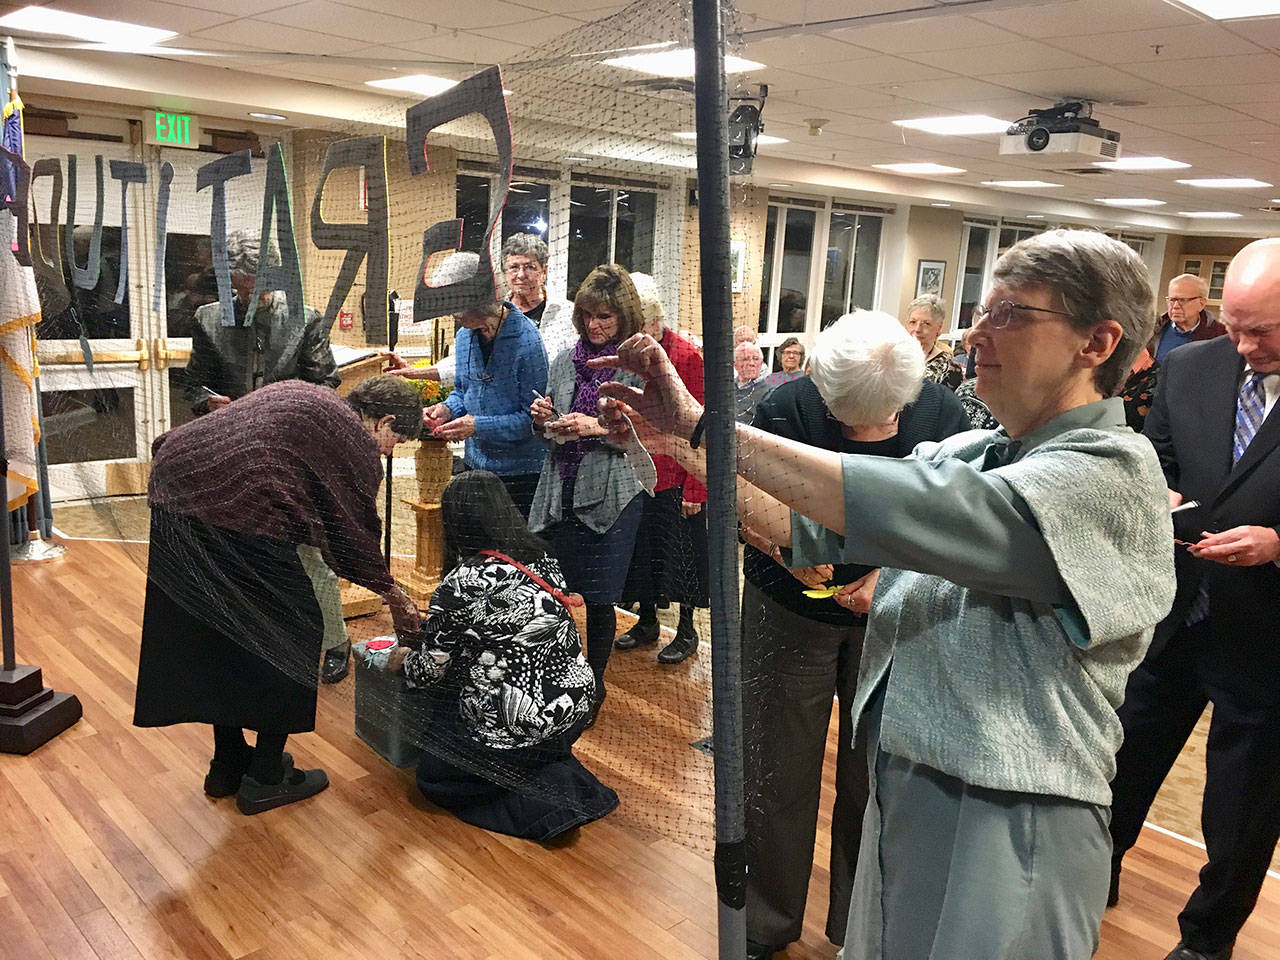 Event attendees hang things on the “the wall of gratitude” after a community interfaith Thanksgiving service at Covenant Shores on Nov. 19. Photo courtesy of Greg Asimakoupoulos